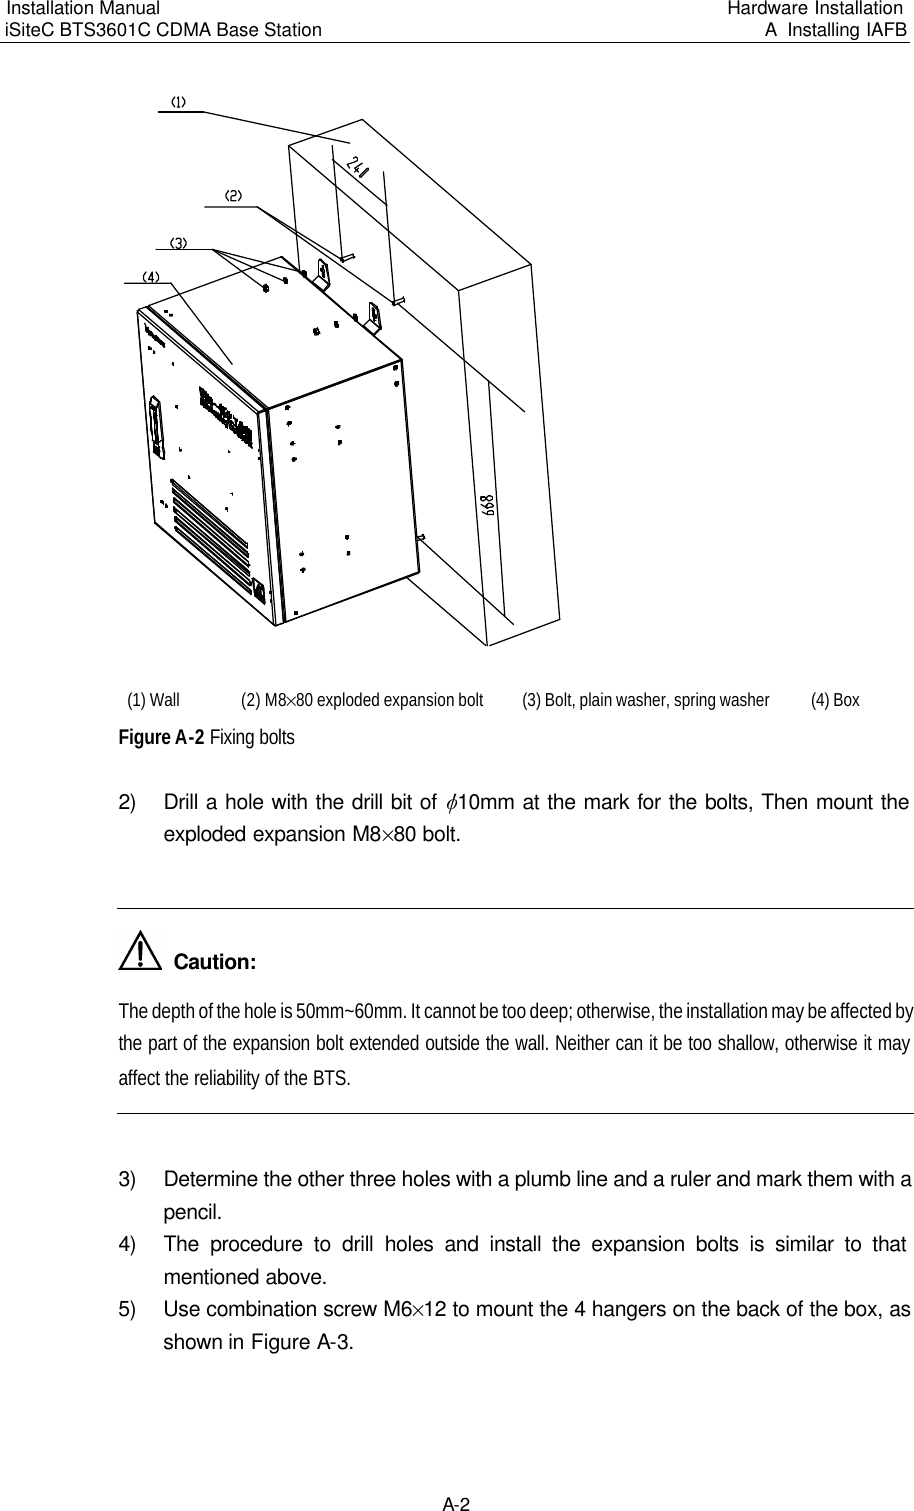 Installation Manual   iSiteC BTS3601C CDMA Base Station Hardware Installation A  Installing IAFB  A-2 　(1) Wall　(2) M8%80 exploded expansion bolt 　(3) Bolt, plain washer, spring washer　(4) Box　Figure A-2 Fixing bolts　2) Drill a hole with the drill bit of v10mm at the mark for the bolts, Then mount the exploded expansion M8%80 bolt.　   Caution: The depth of the hole is 50mm~60mm. It cannot be too deep; otherwise, the installation may be affected by the part of the expansion bolt extended outside the wall. Neither can it be too shallow, otherwise it may affect the reliability of the BTS.  3) Determine the other three holes with a plumb line and a ruler and mark them with a pencil.　4) The procedure to drill holes and install the expansion bolts is similar to that mentioned above.　5) Use combination screw M6%12 to mount the 4 hangers on the back of the box, as shown in Figure A-3.　